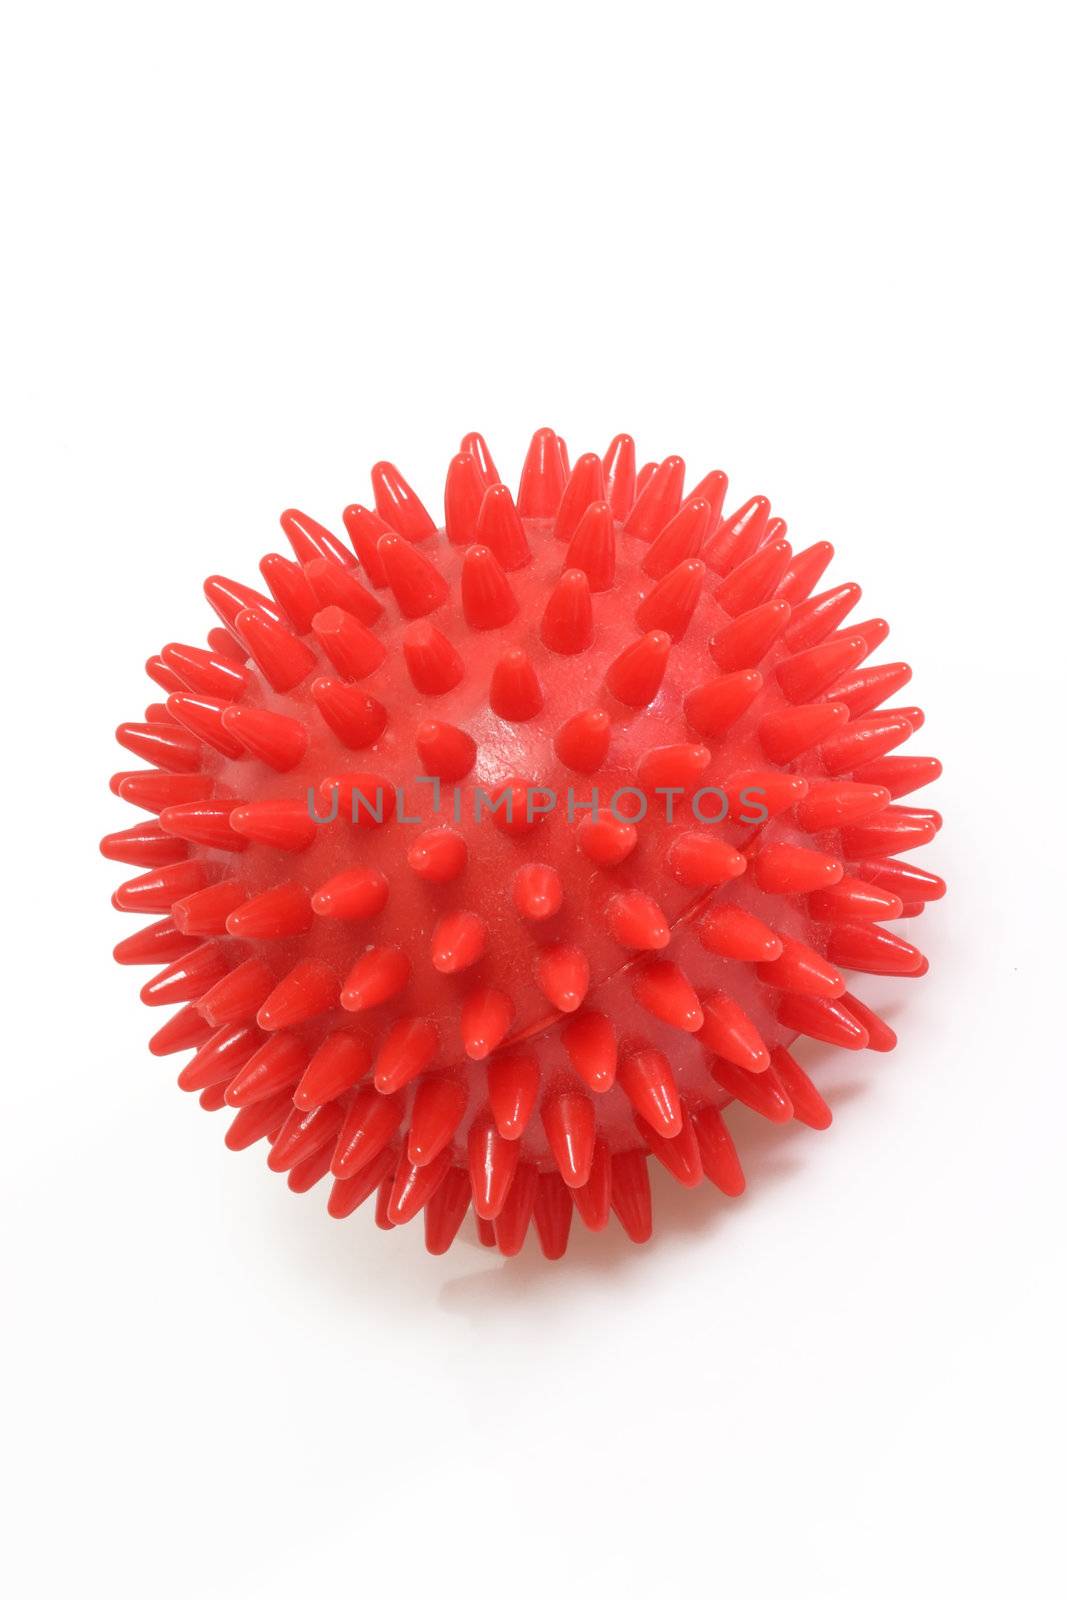 Red massage ball on bright background